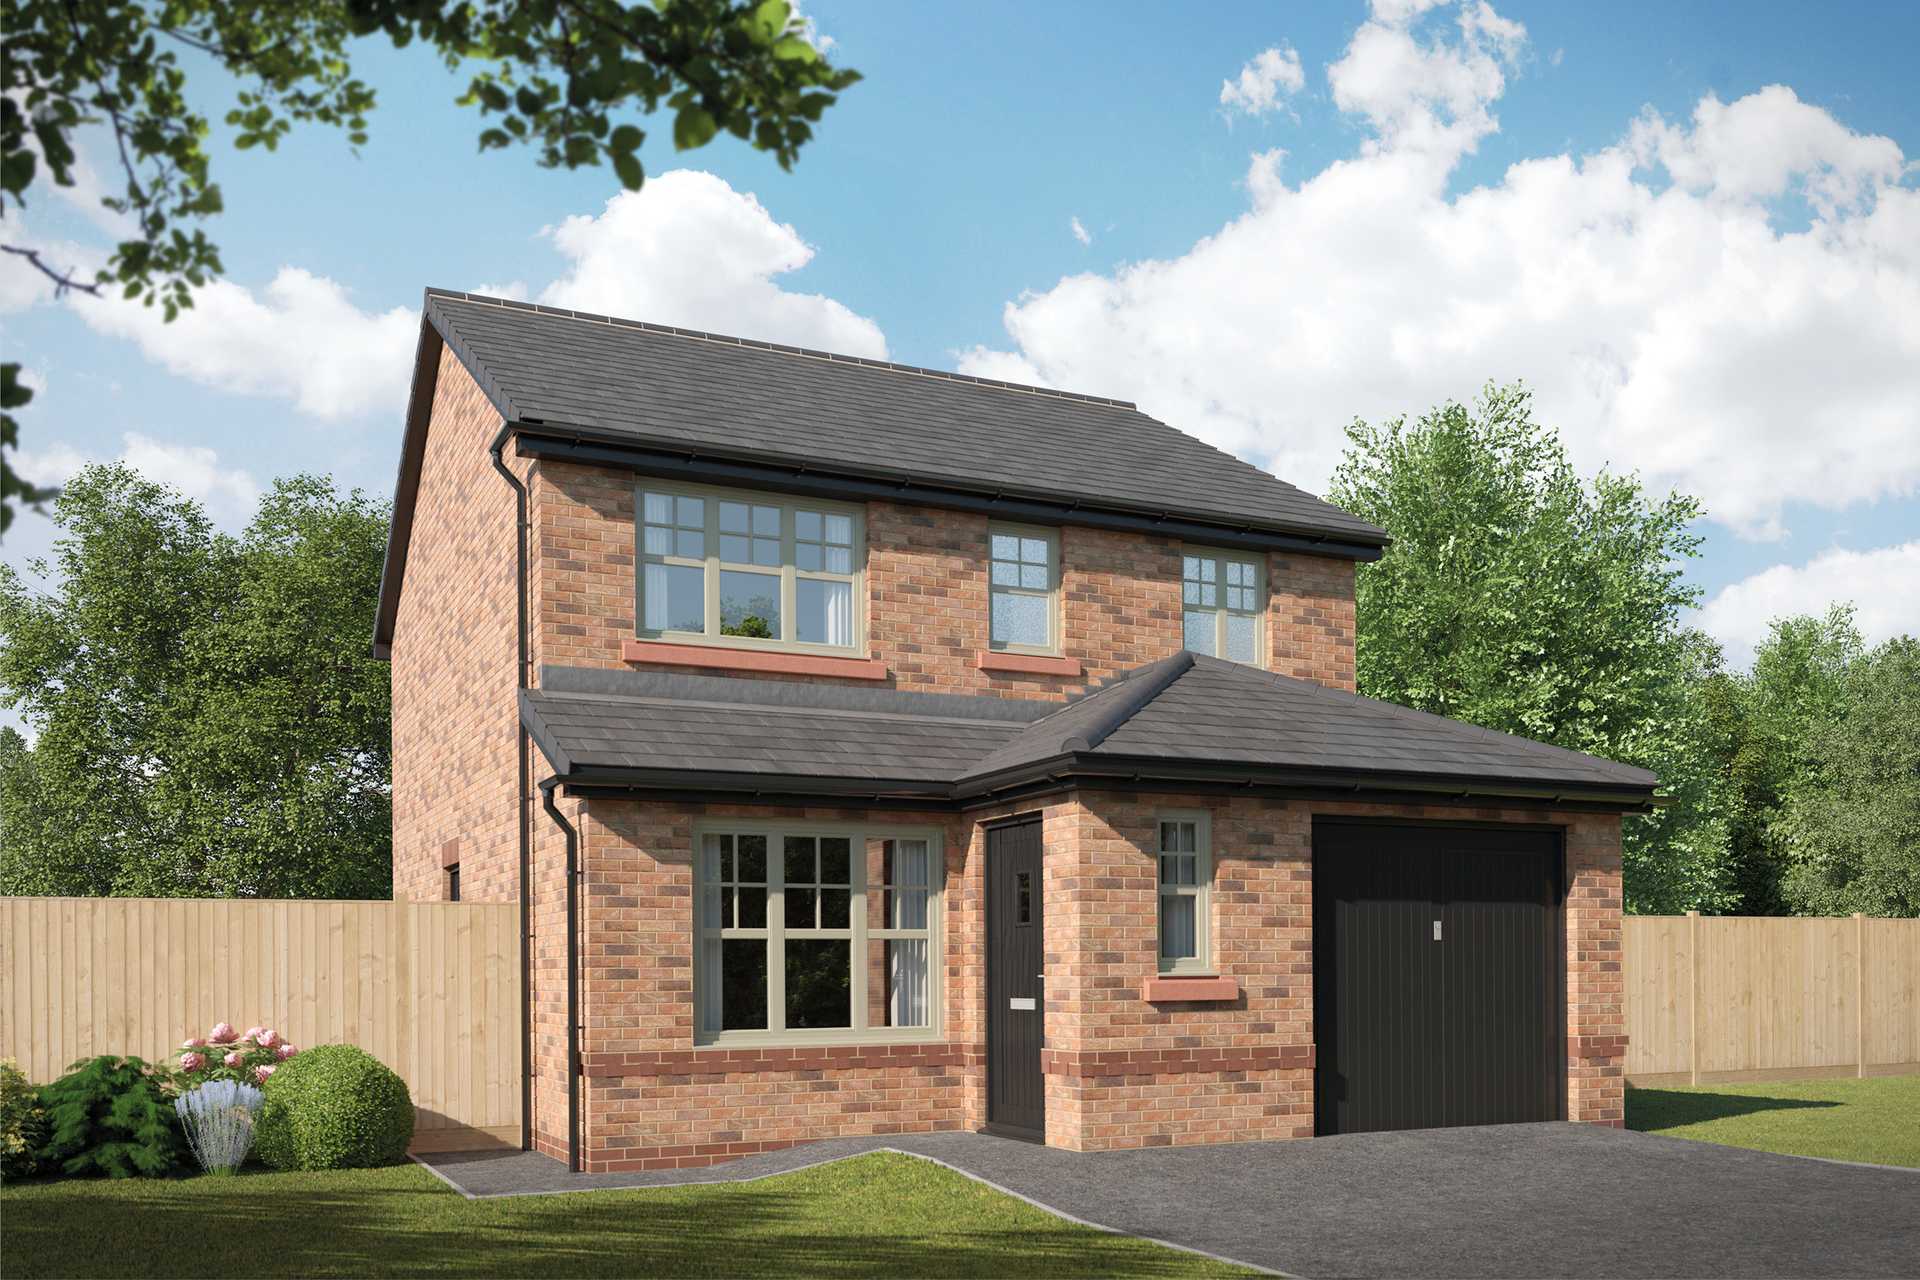 House in Macclesfield, Cheshire East 11874225